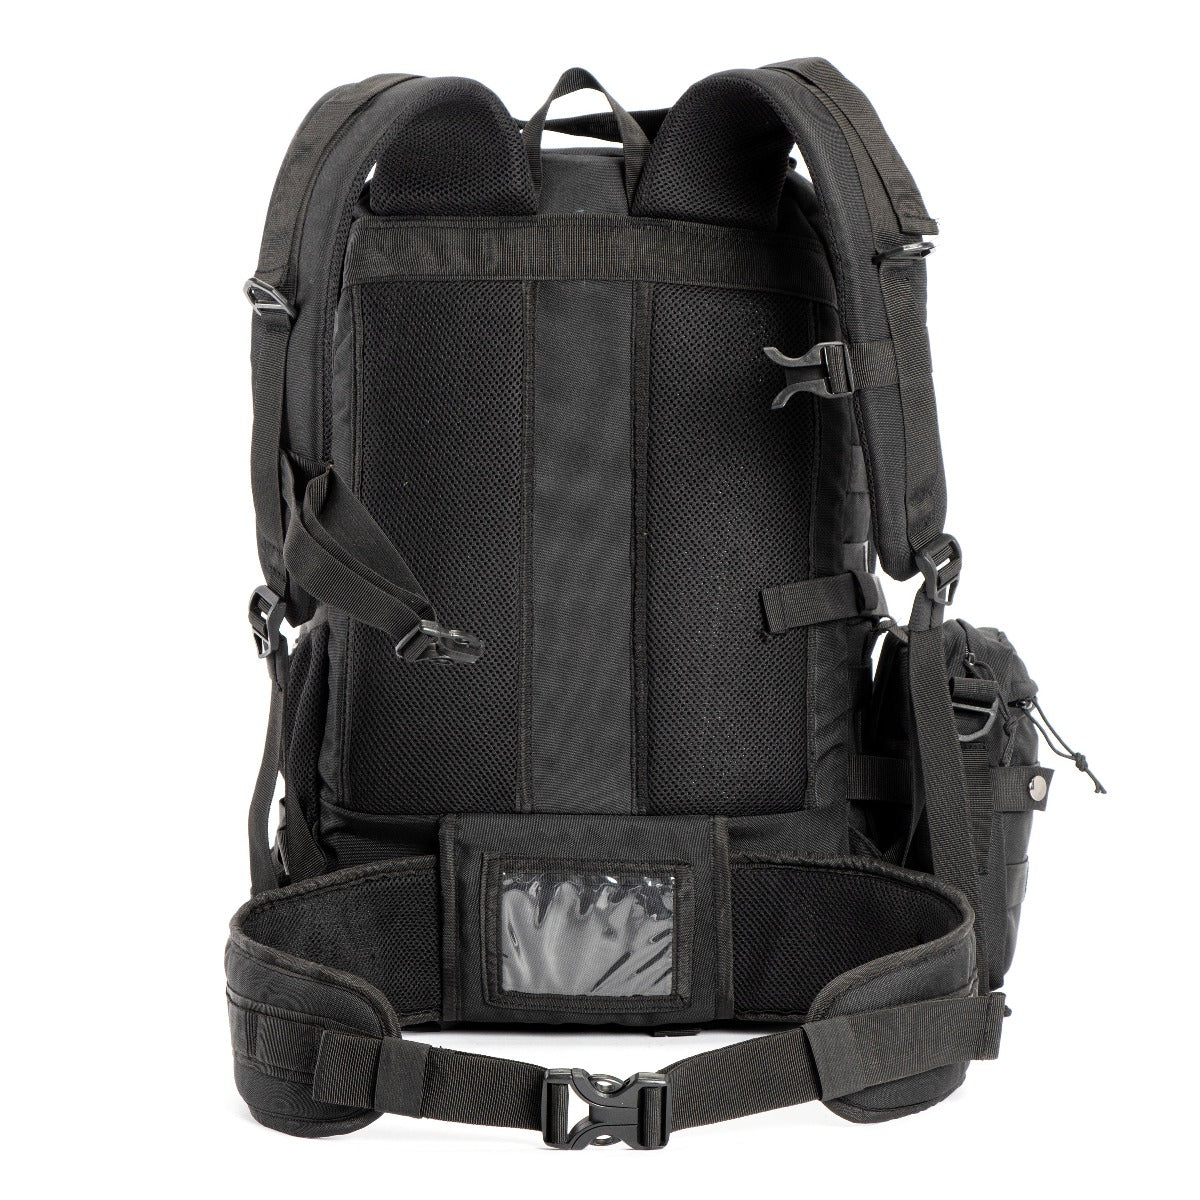 Tripole Alfa Military Tactical Backpack with Sling Bag Attachment -  46 Litres - Black 3